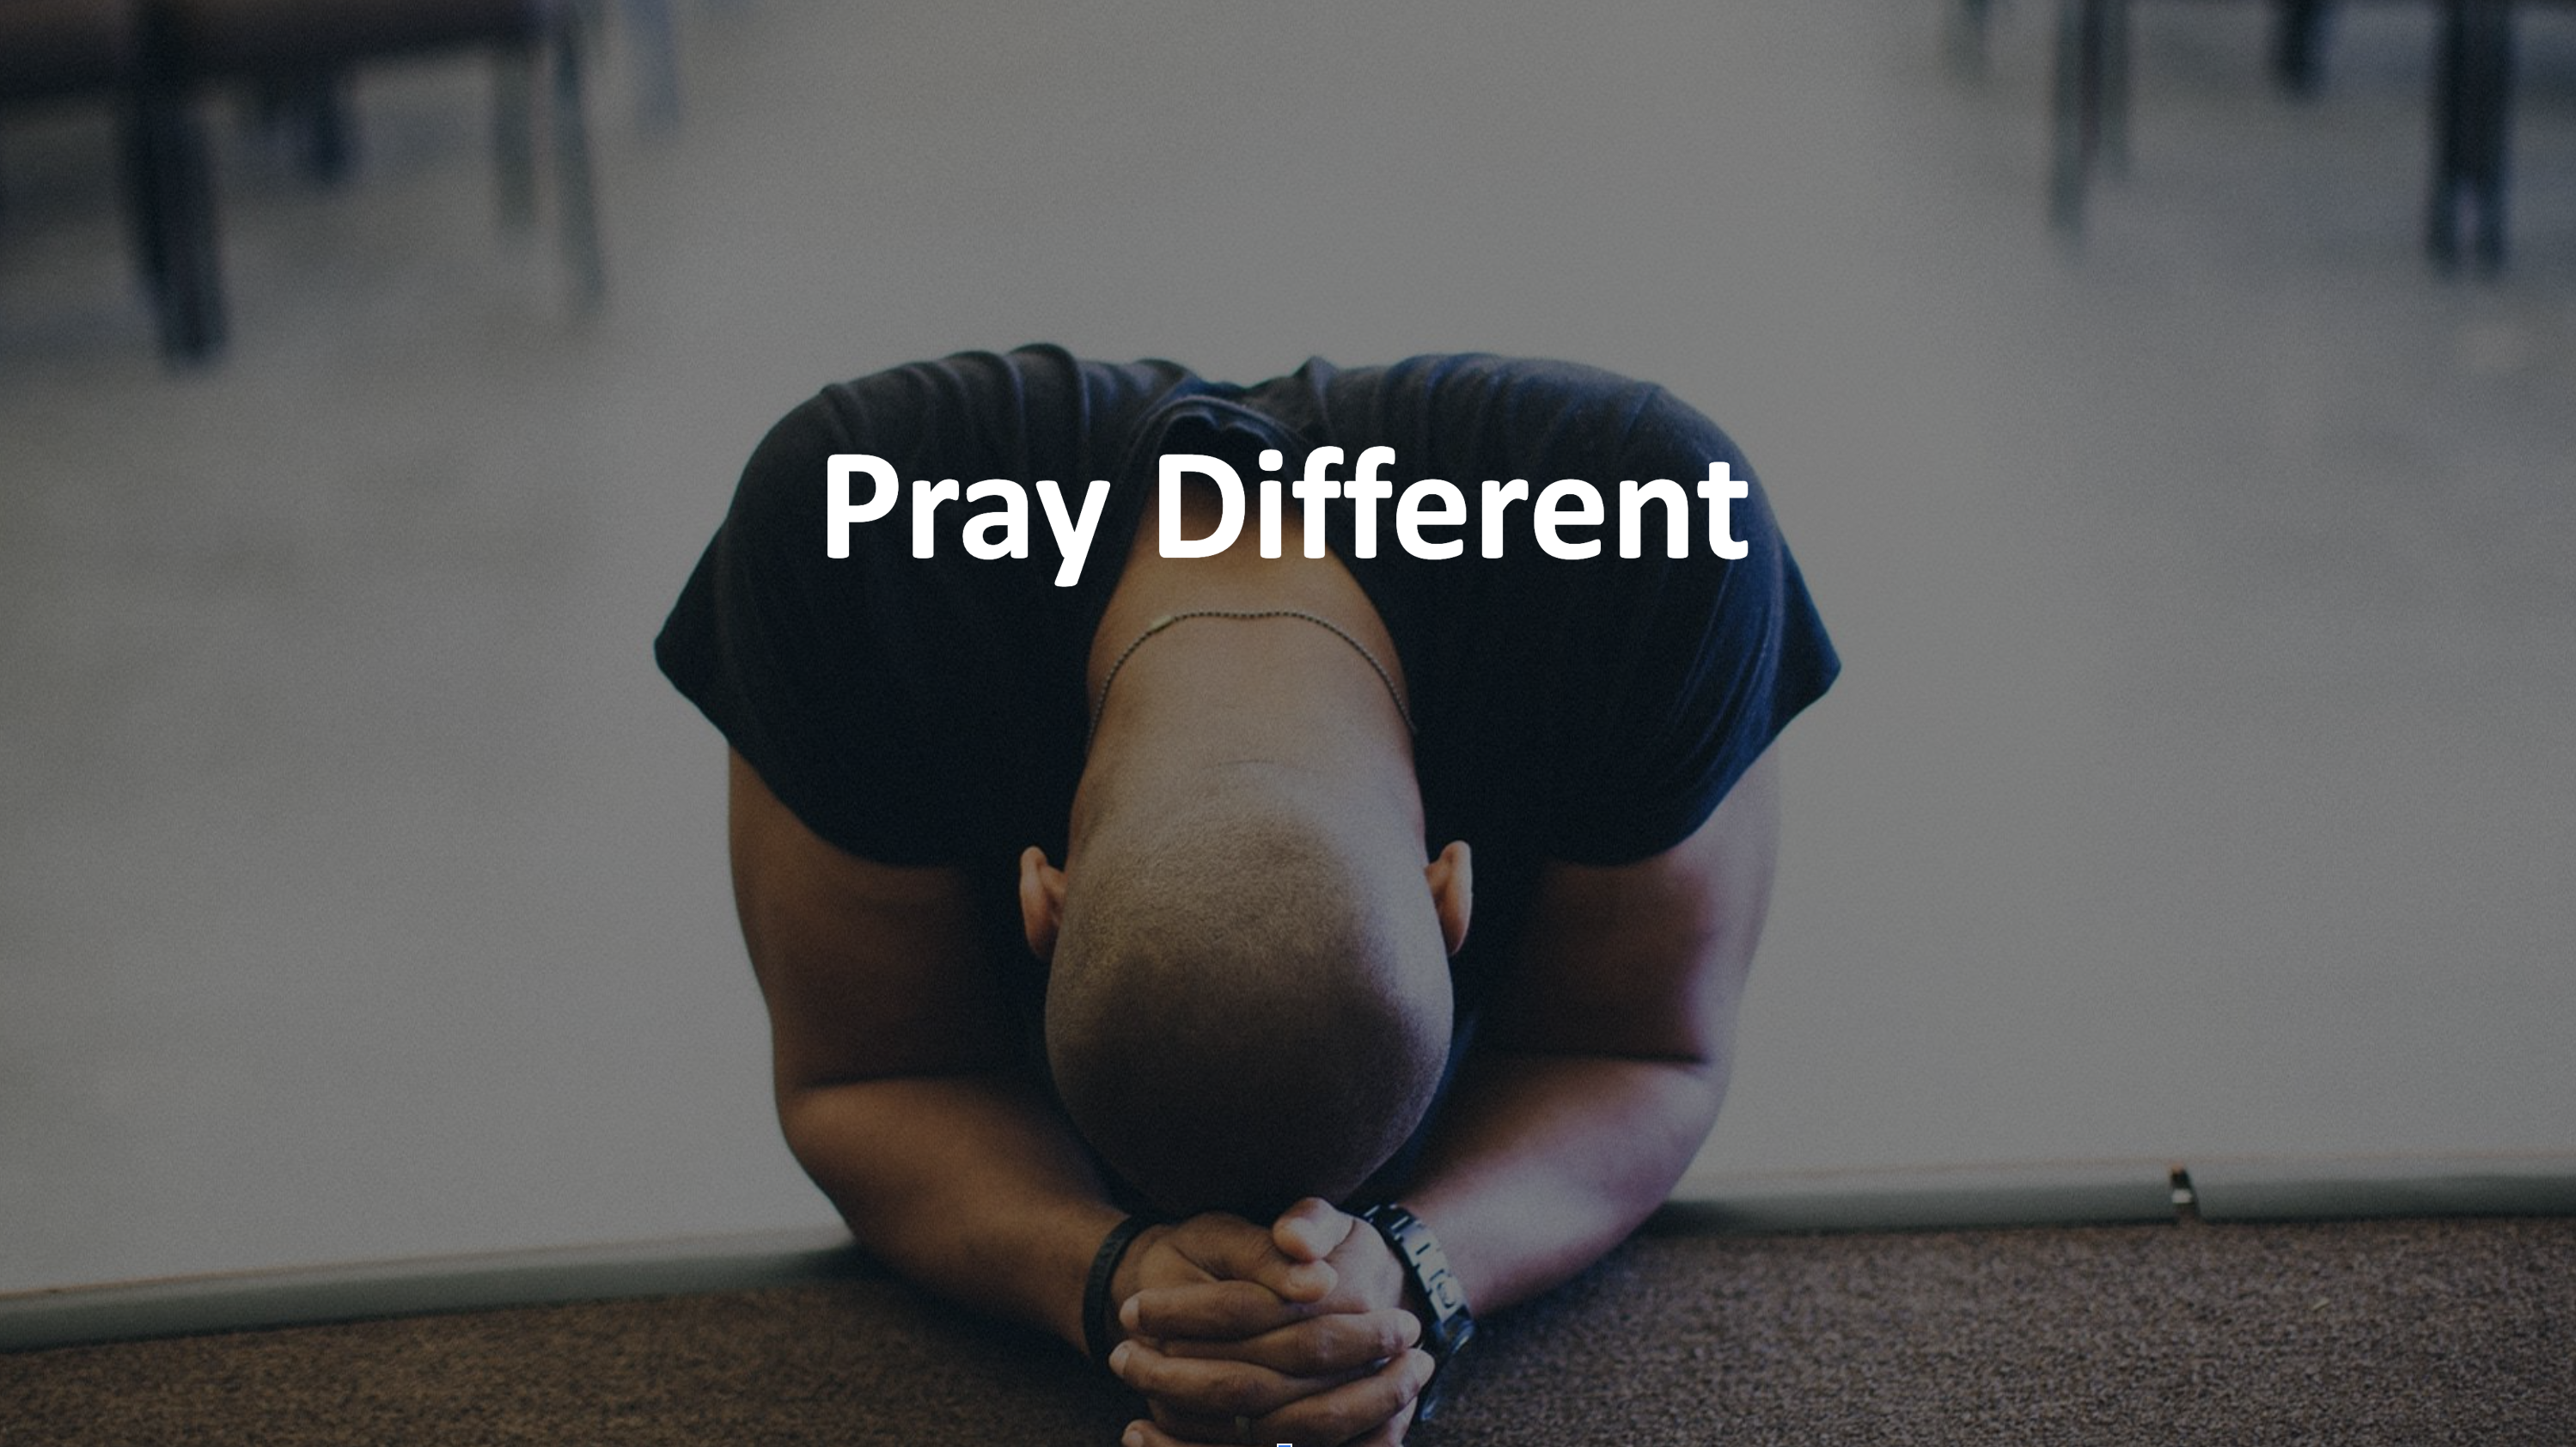 Featured image for “Pray Different by Randy Maxwell”